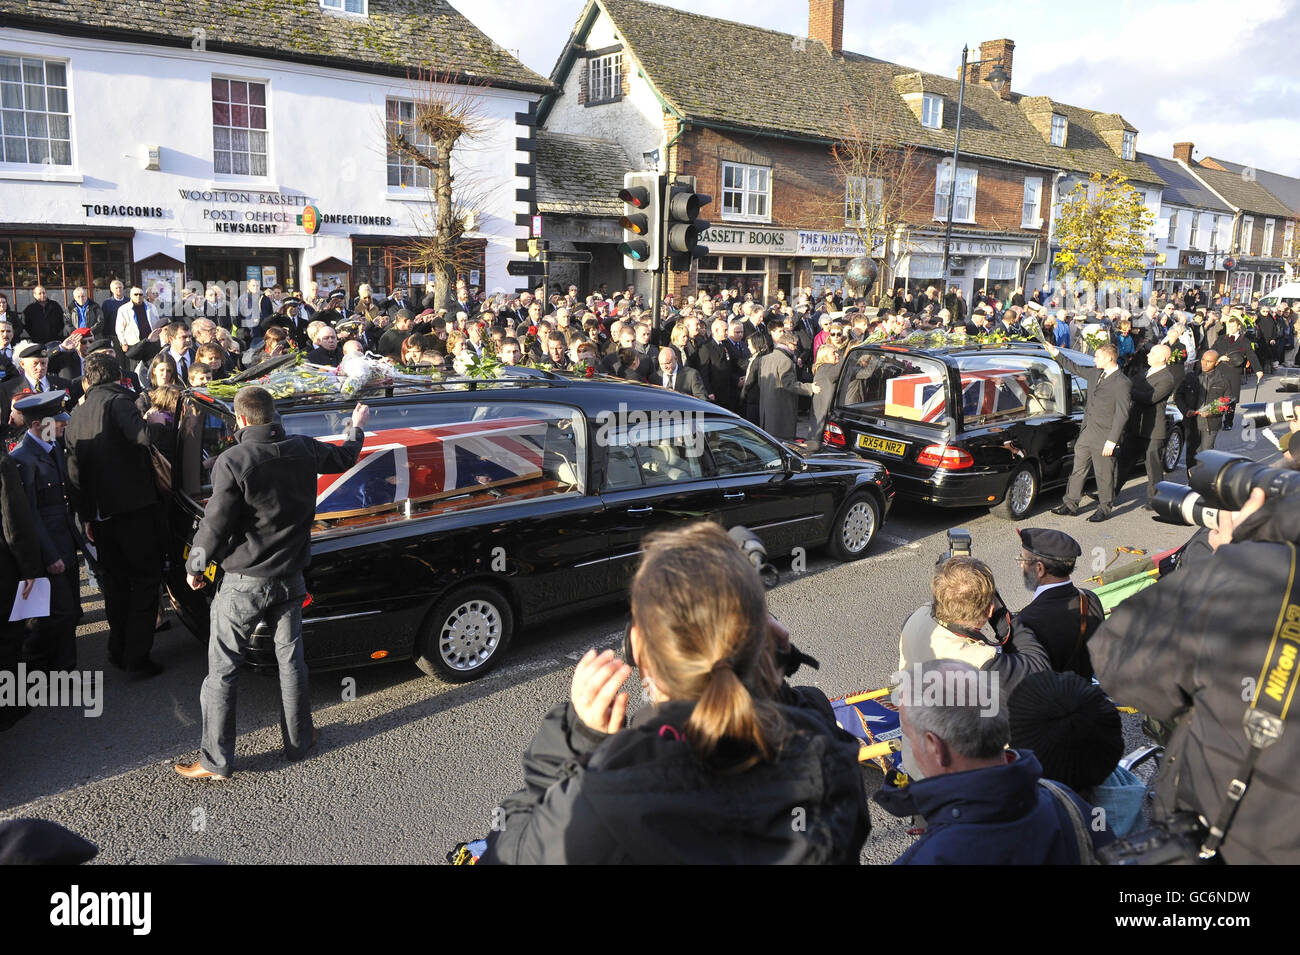 Mourners throw flowers onto the hearses at a repatriation through the Wiltshire town of Wootton Bassett as the bodies of Rifleman Philip Allen, 20, of 2nd Battalion The Rifles and Samuel John Bassett, 20, of 4th Battalion The Rifles pass through the High Street. Stock Photo